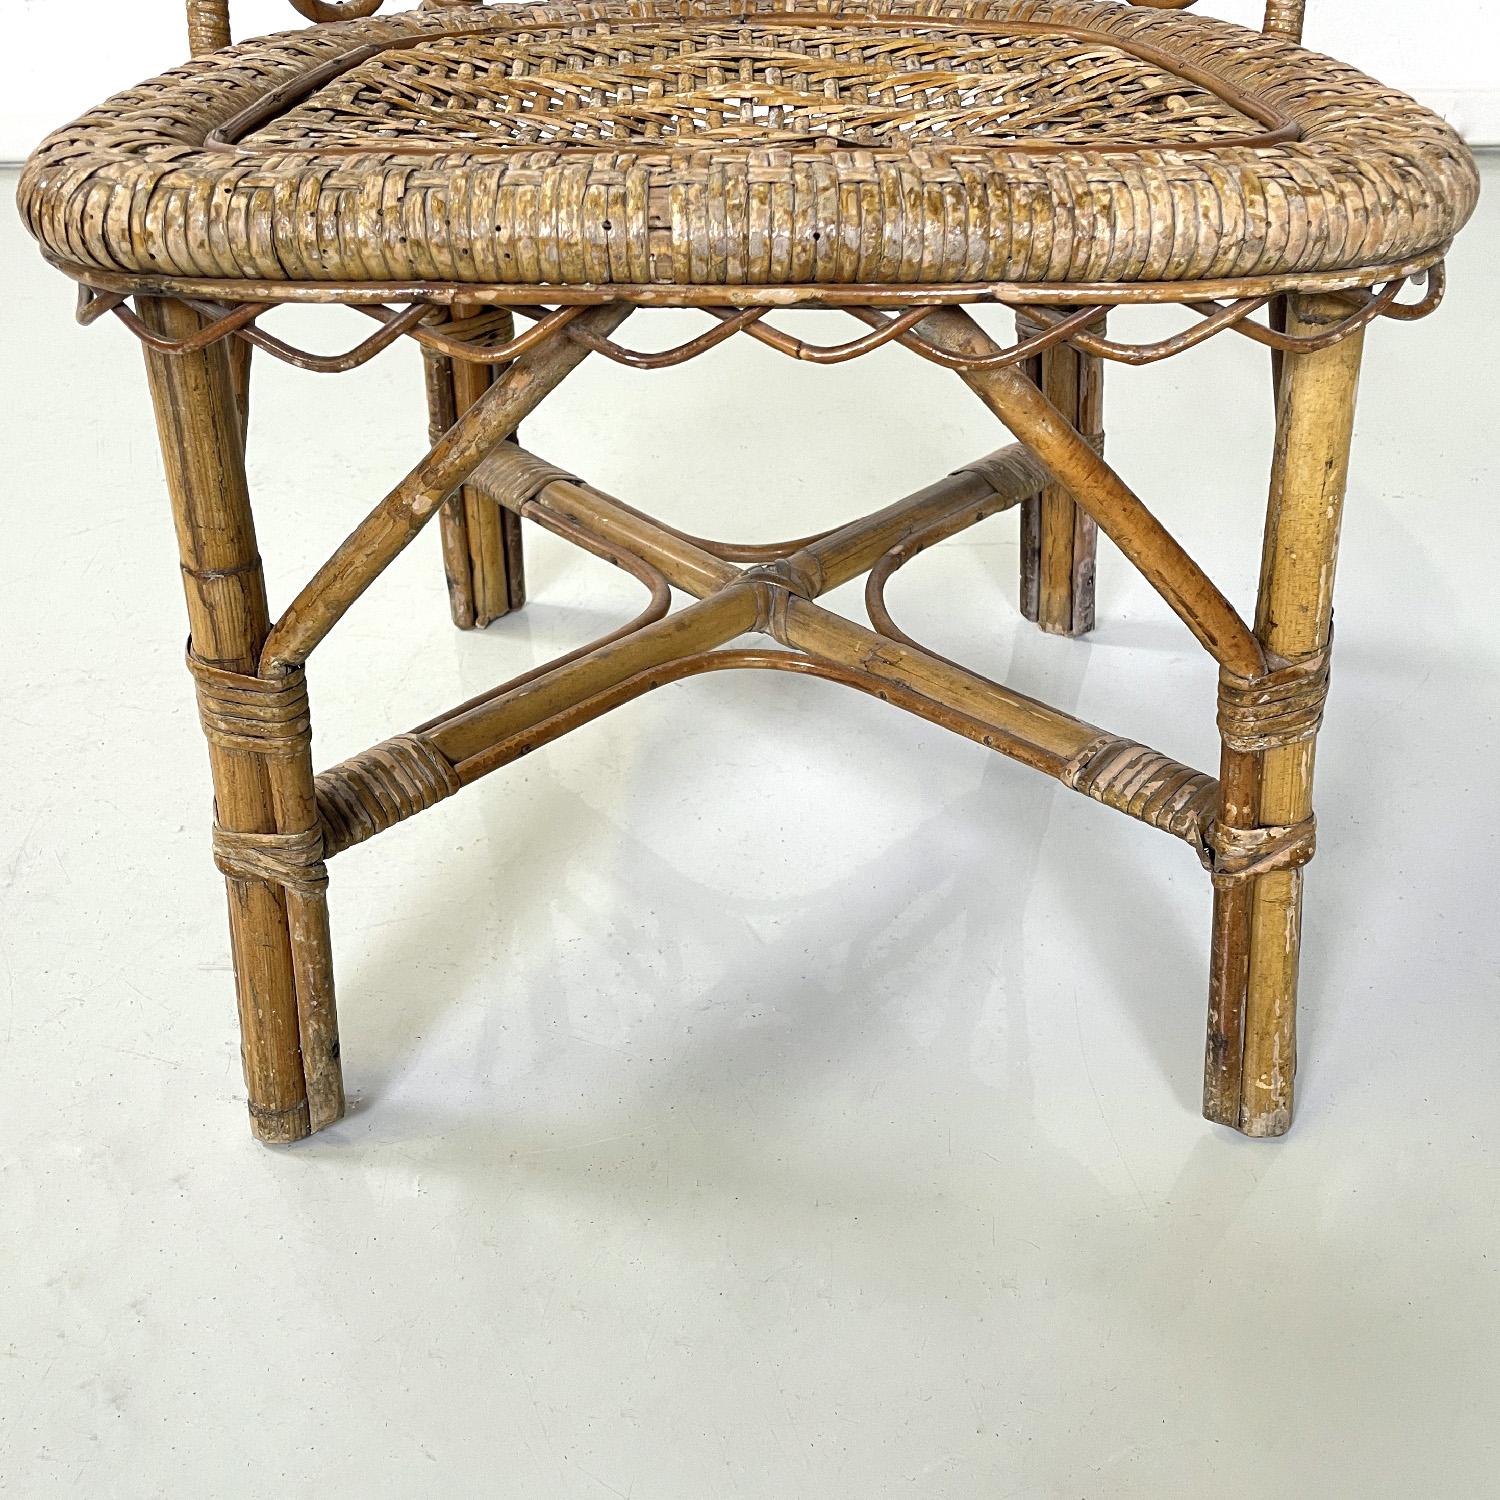 Italian antique rattan chair with floral and geometric decoration, early 1900s For Sale 9